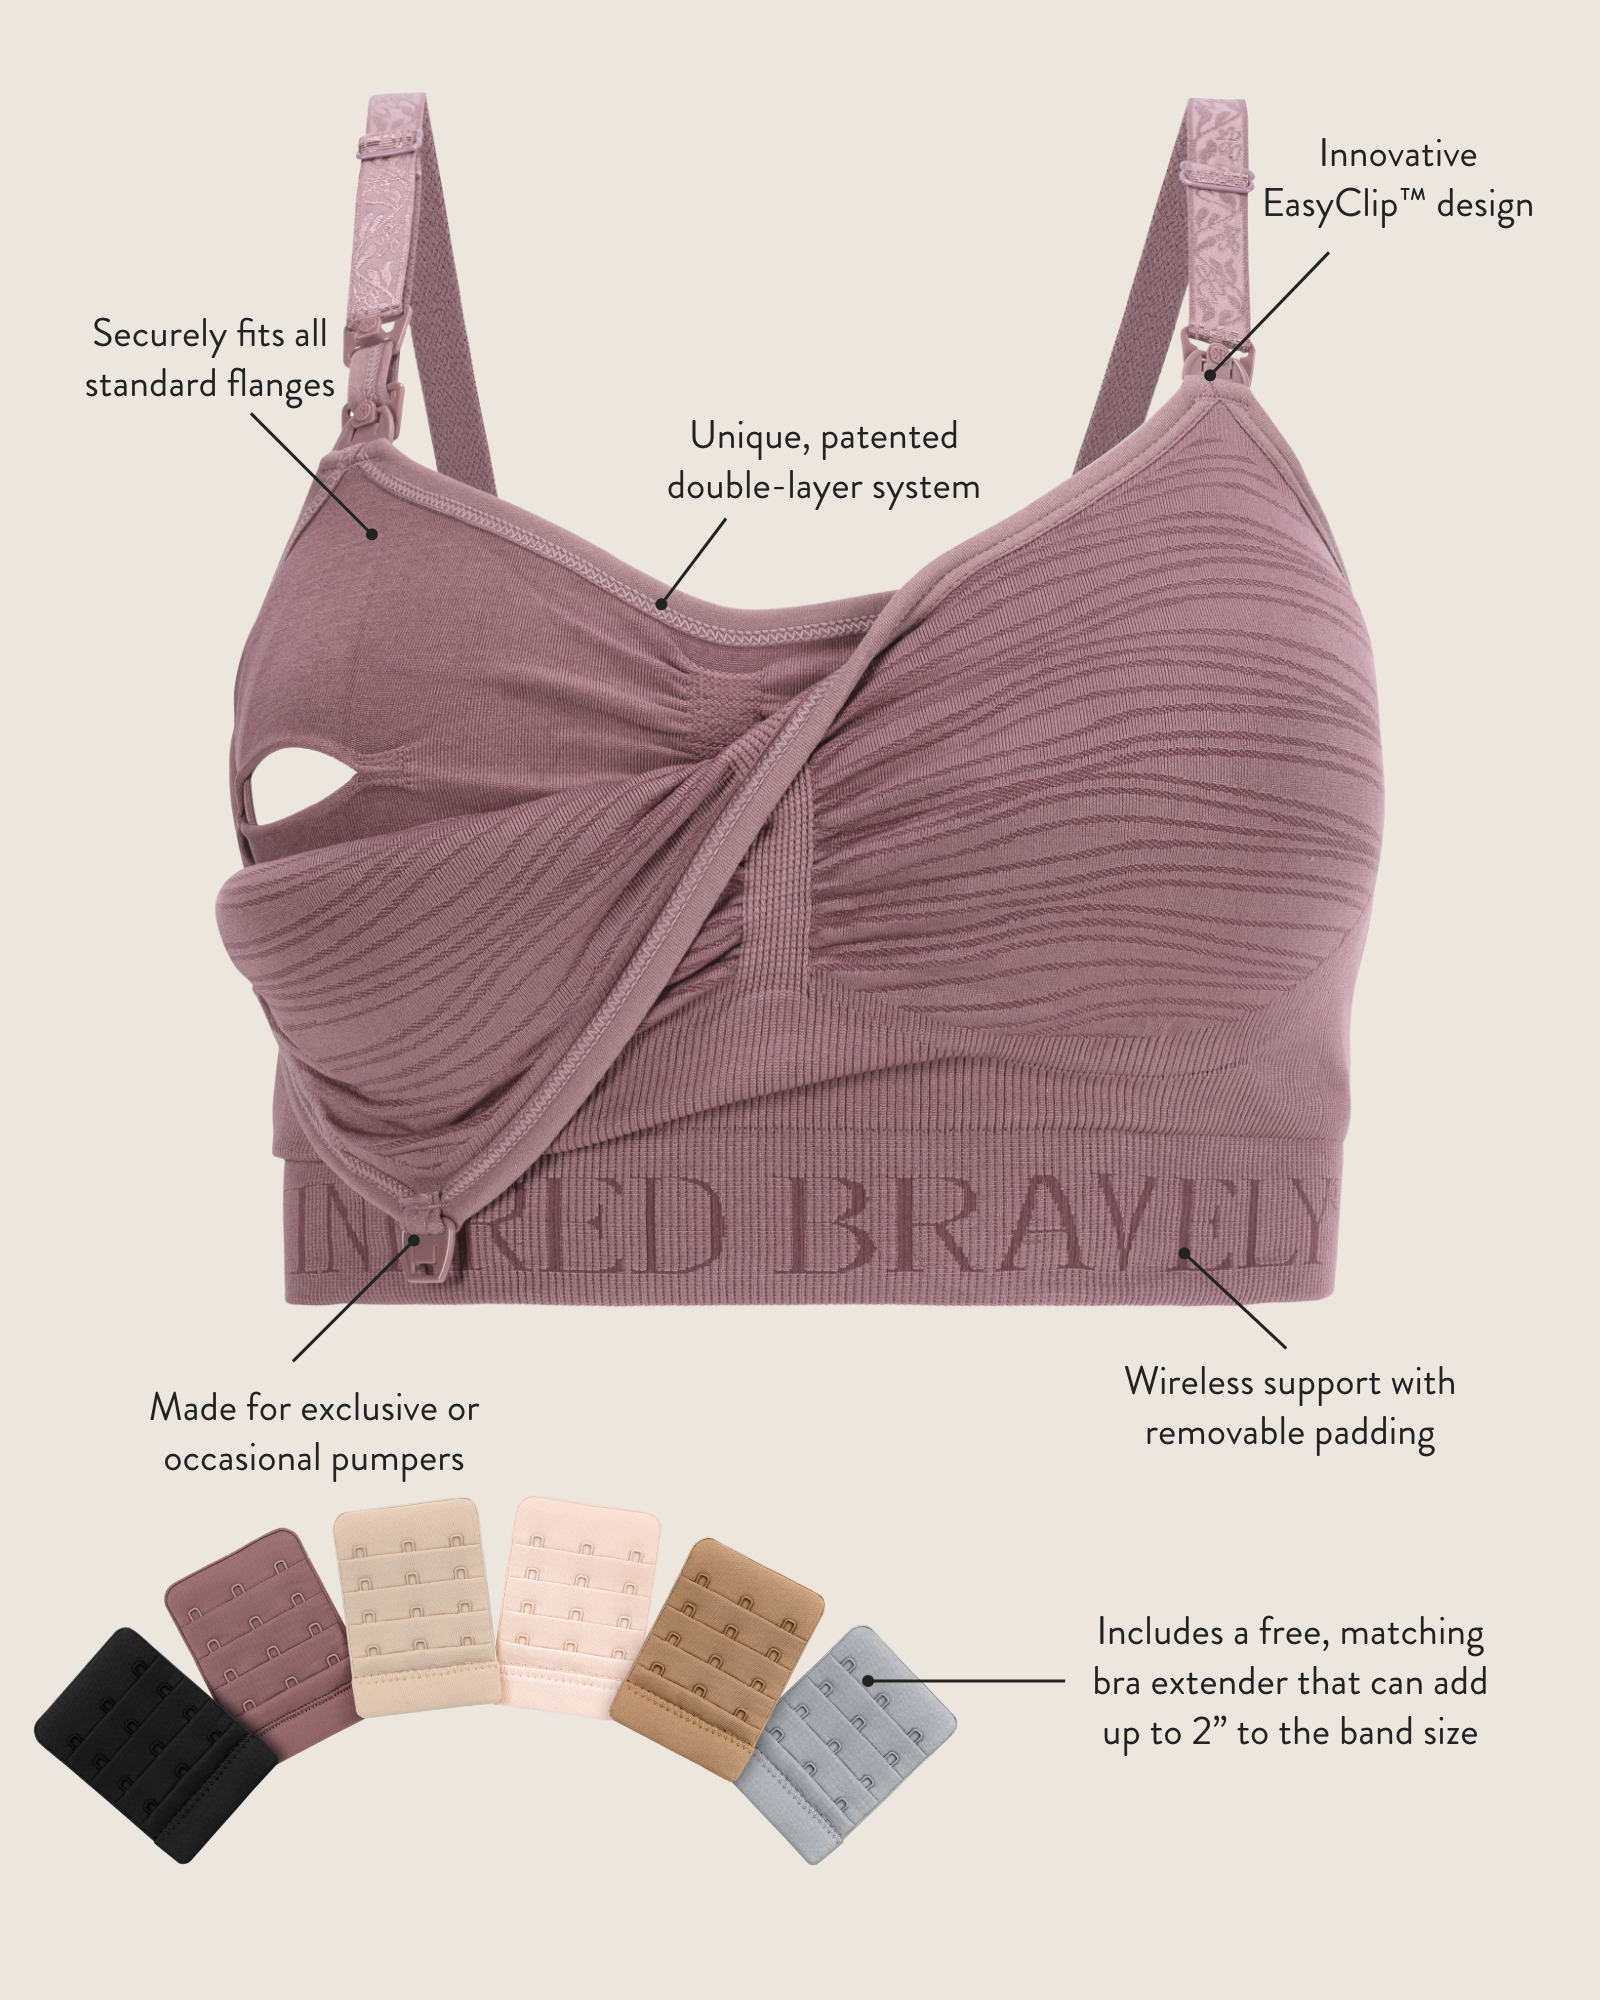 Product image of the Sublime® Hands-Free Pumping & Nursing Bra, with featured called out and image of bra extenders.